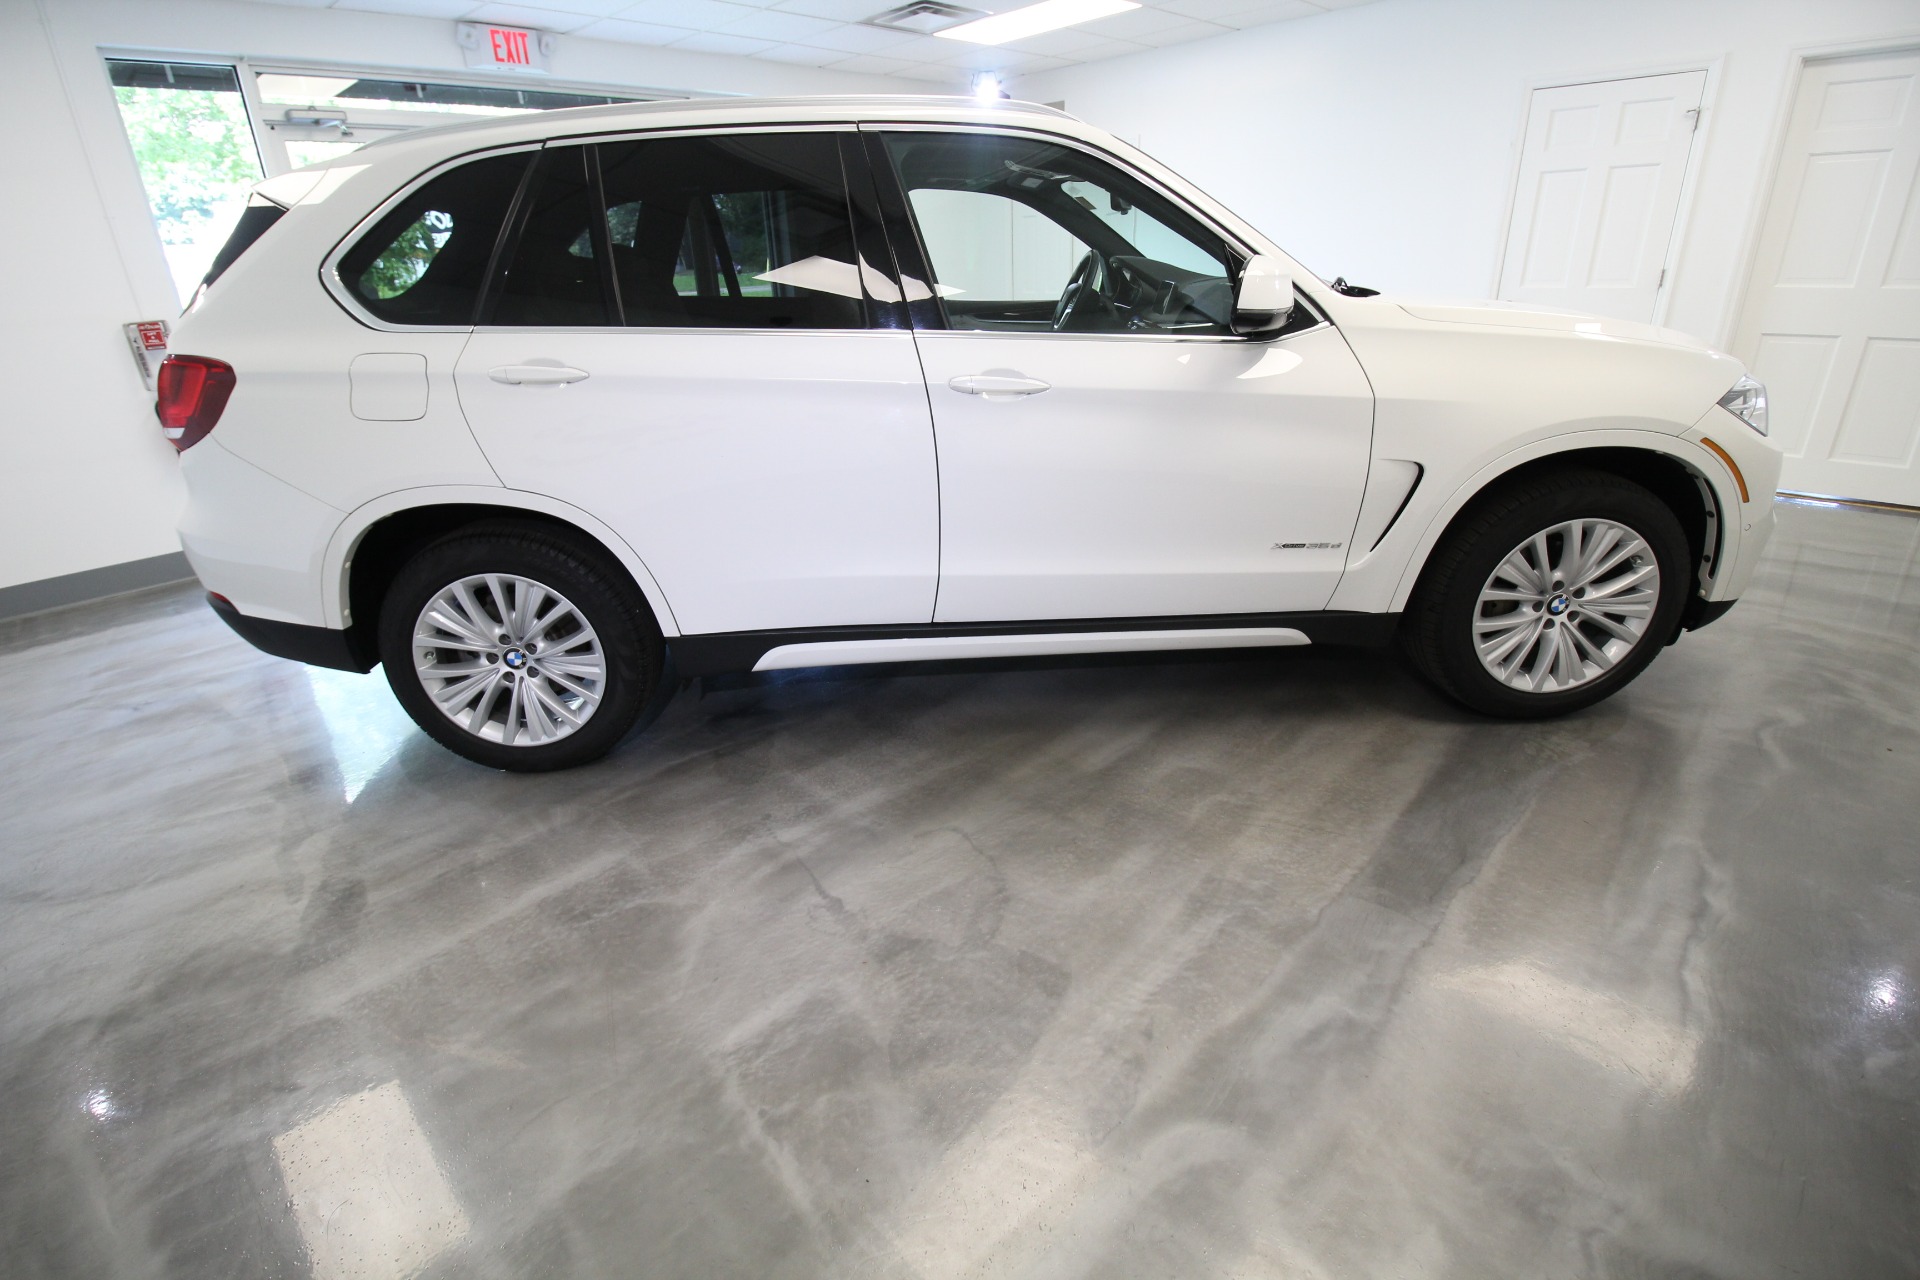 Used 2017 WHITE BMW X5 xDrive35D GREAT MPG LIKE NEW LOW MILES SUPERB CONDITION DIESEL | Albany, NY